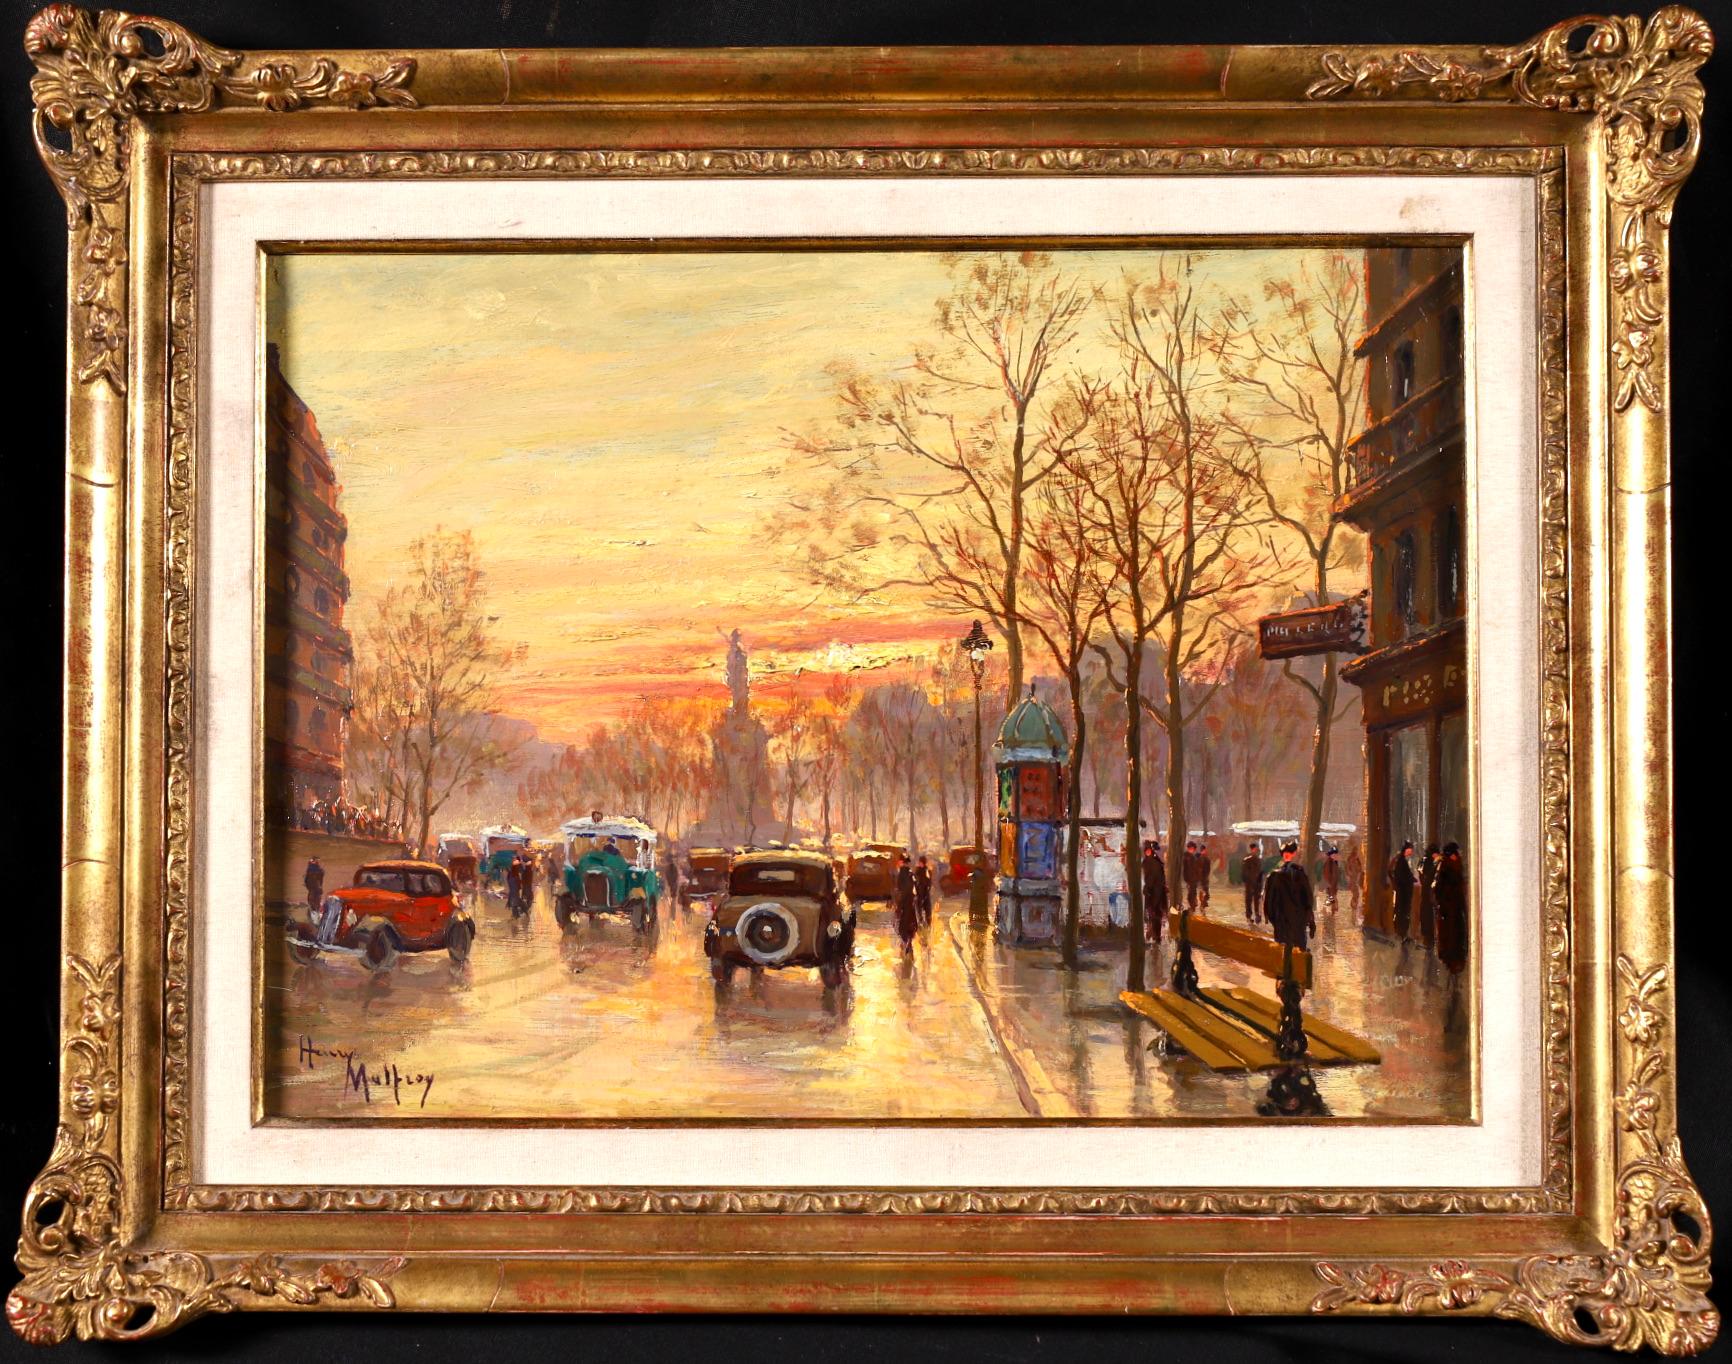 Sunset - Paris - Post Impressionist Oil, Figutres in Cityscape by Henry Malfroy 1